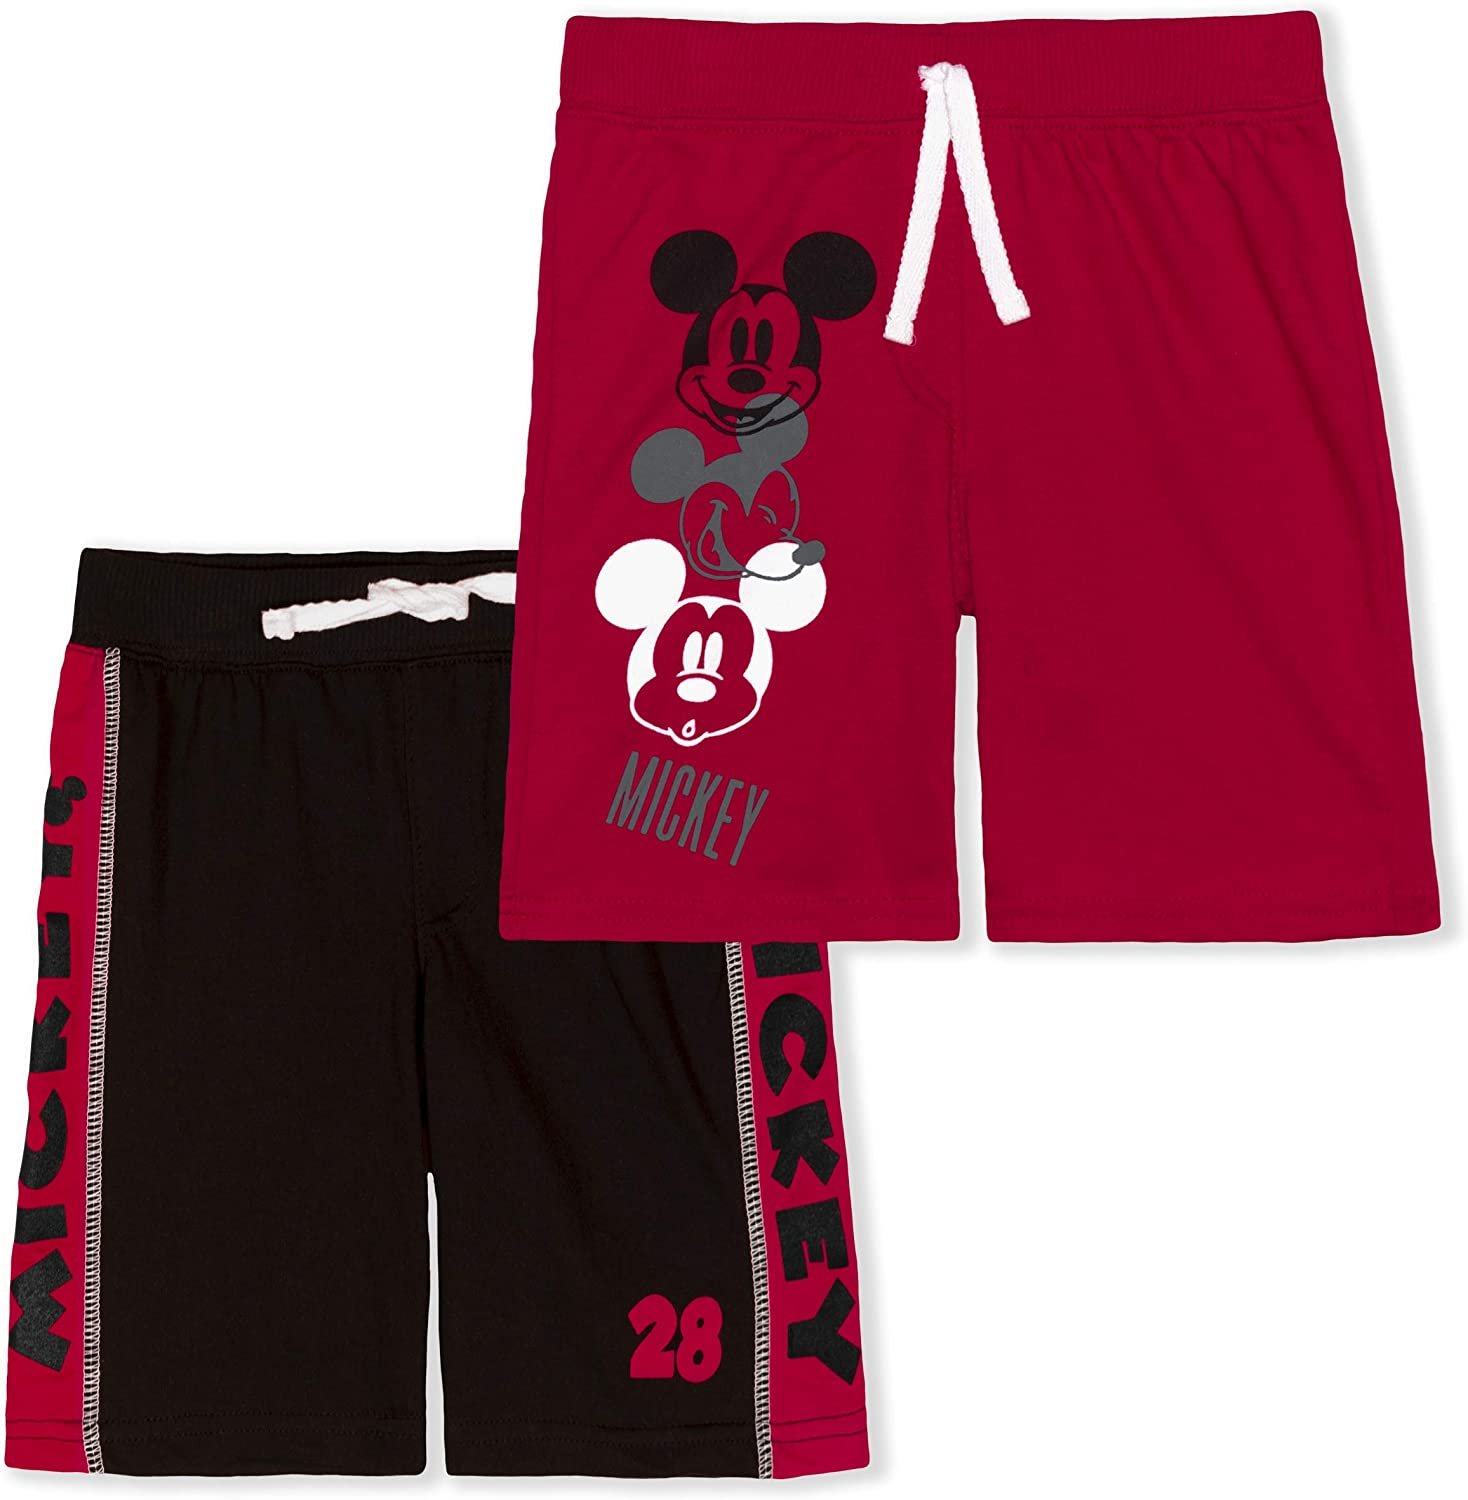 Disney Mickey Mouse 2 Pack Shorts Set for Boys, Toddler Kids Short Pants - image 1 of 5